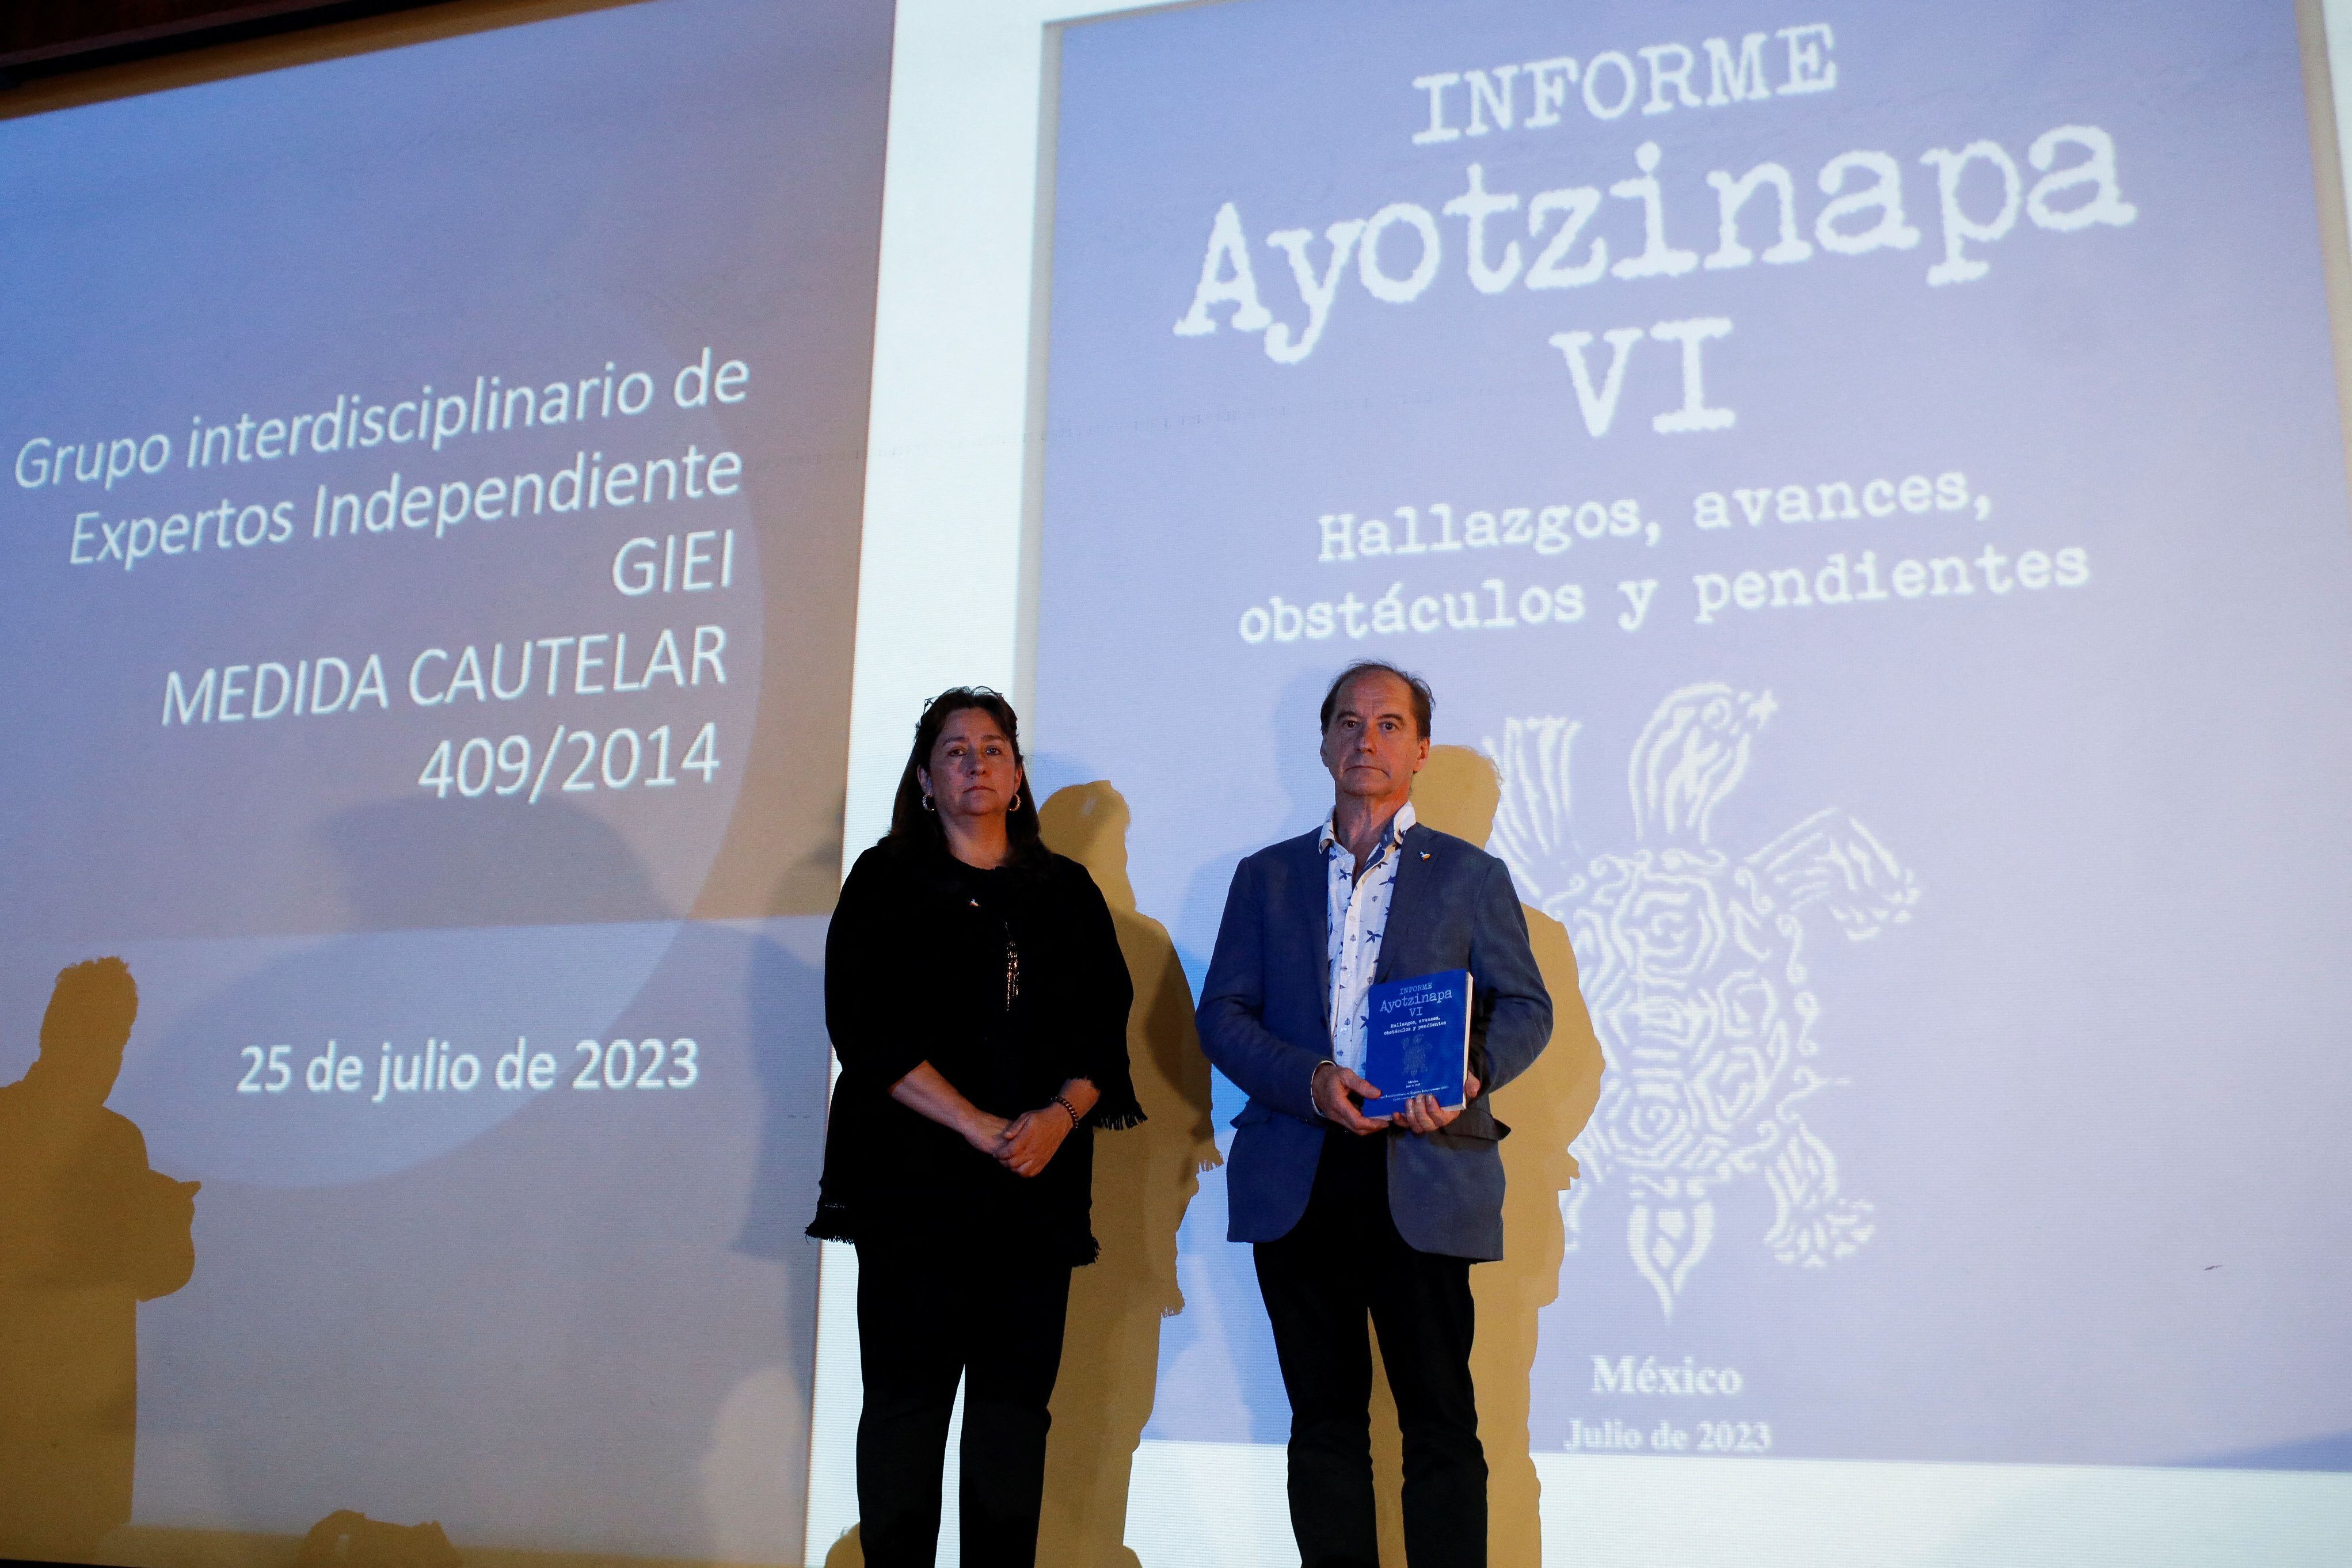 Carlos Martin Beristain and Angela Buitrago, members of the Interdisciplinary Group of Independent Experts (GIEI), pose with Ayotzinapa Report VI during the last press conference on the 43 missing students of the Ayotzinapa Teacher Training College, in Mexico City, Mexico July 25, 2023. REUTERS/Raquel Cunha